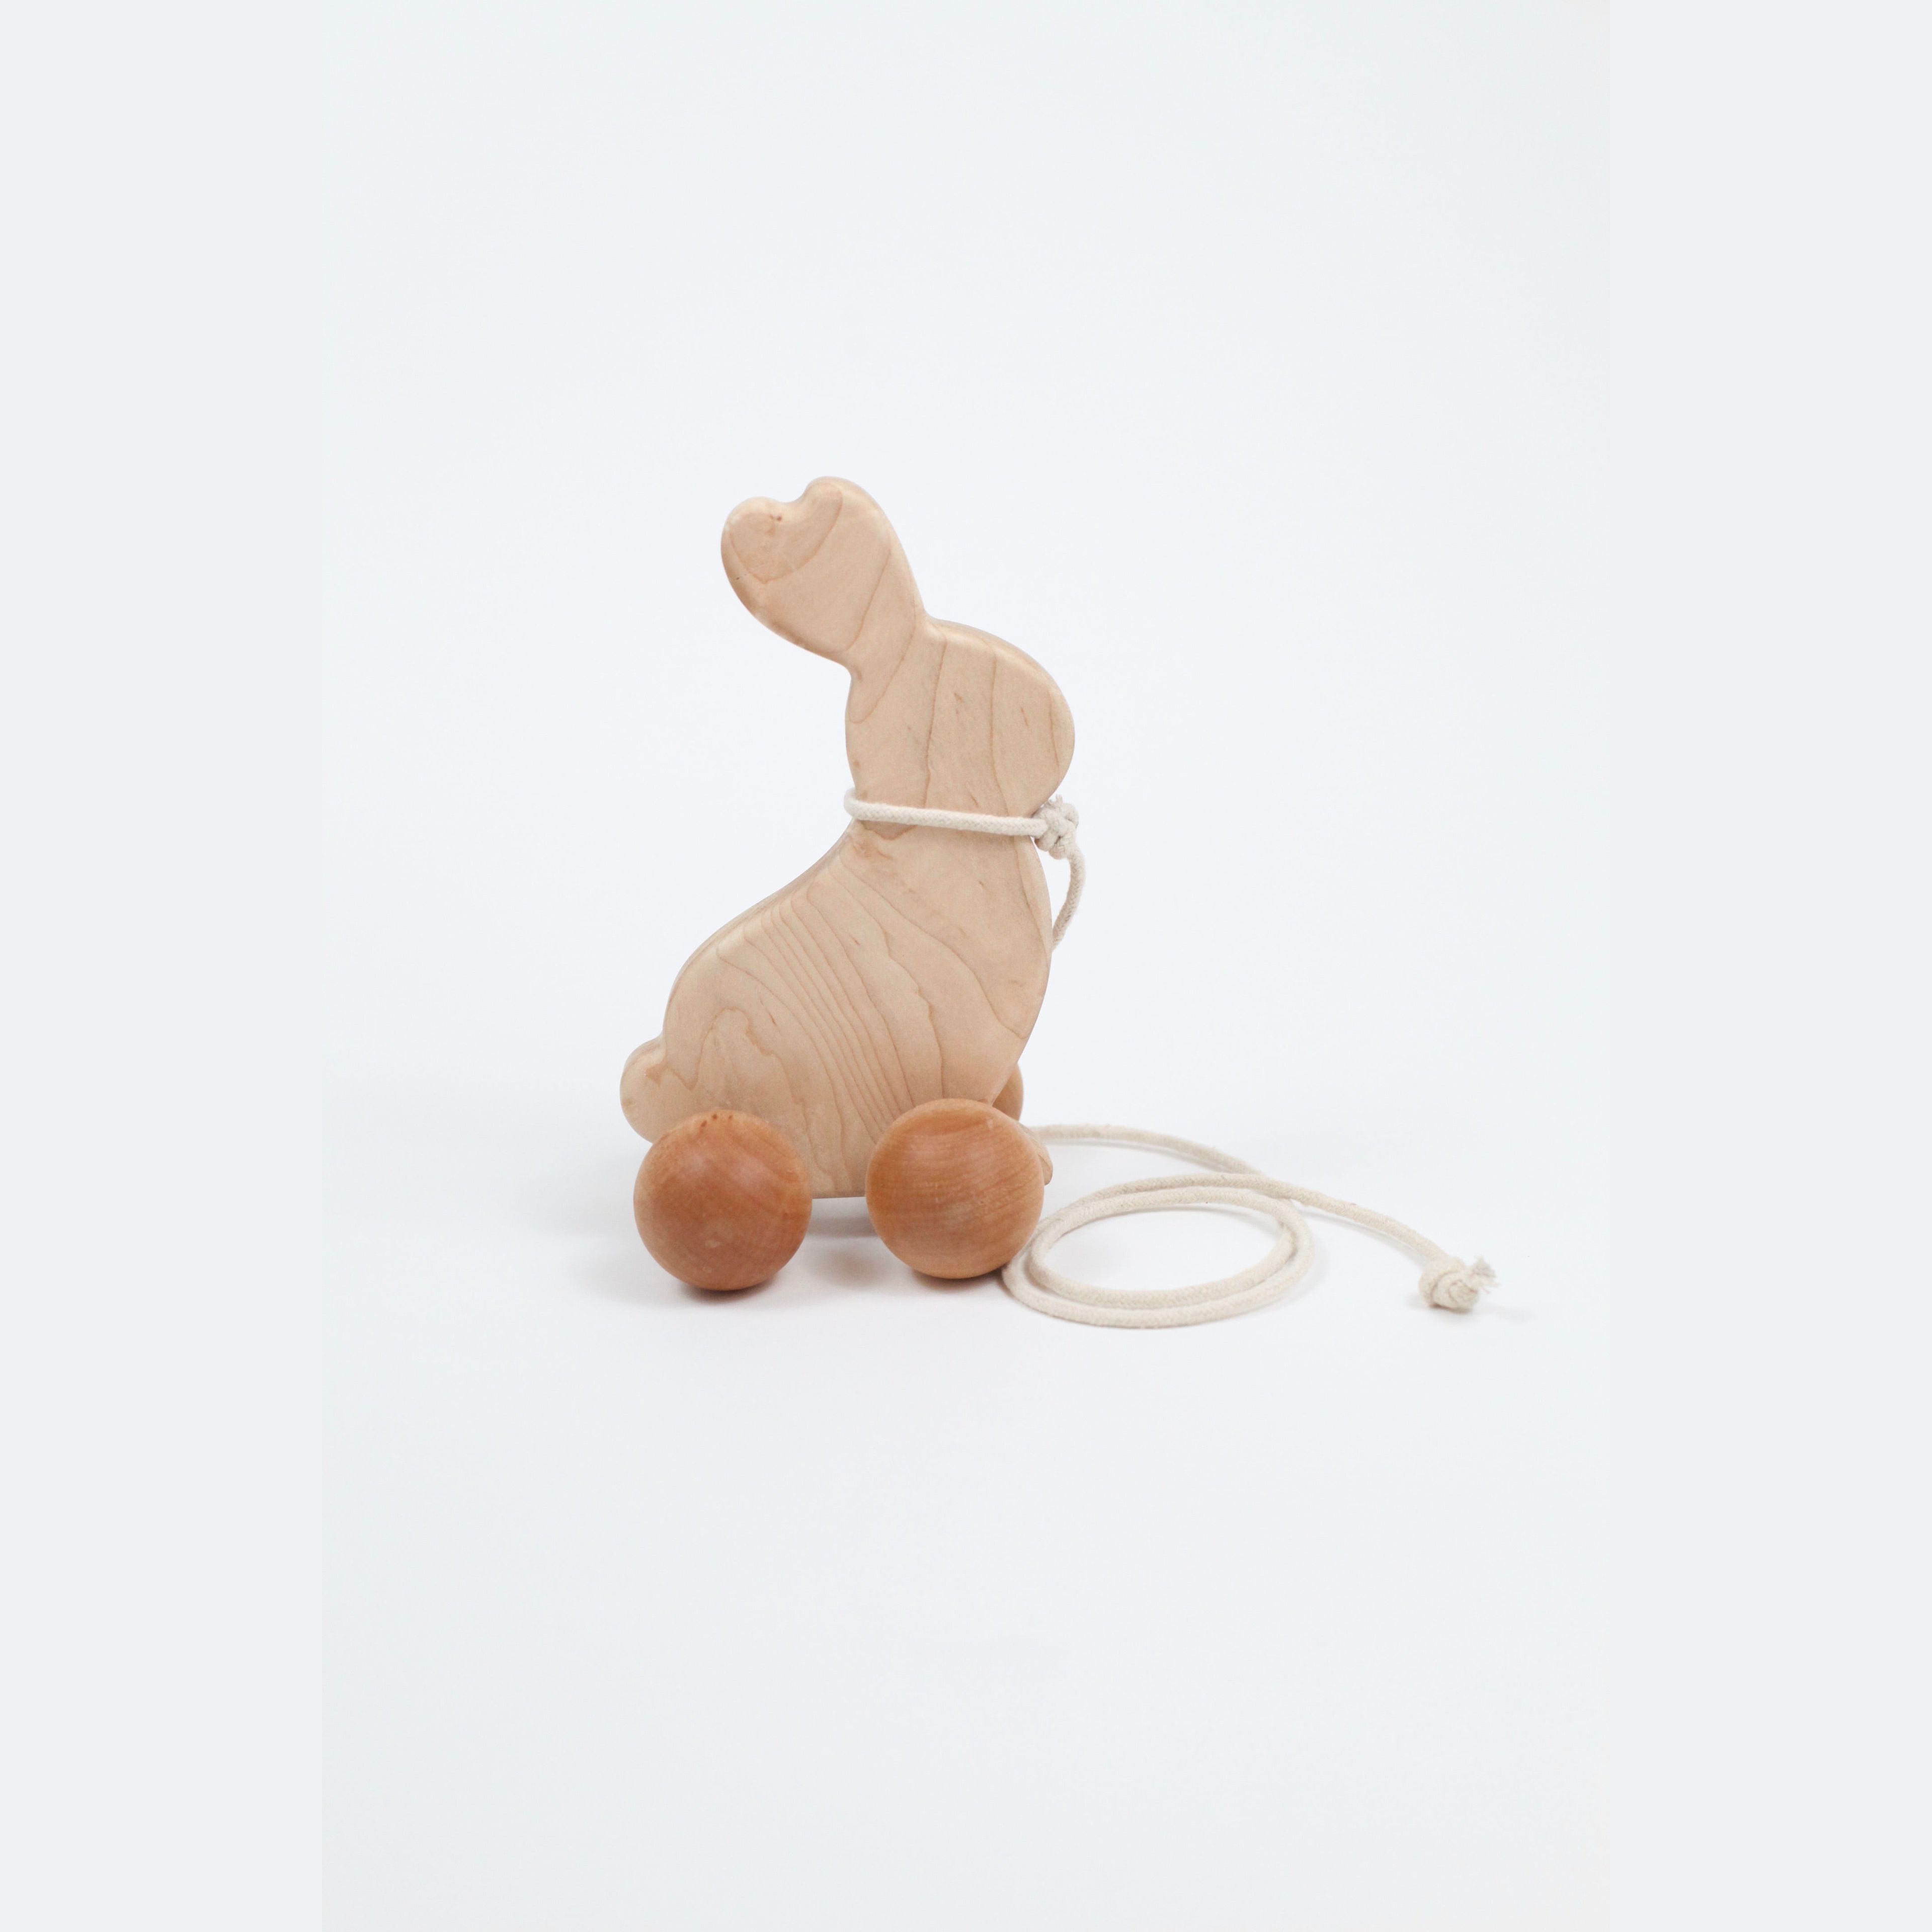 Bunny Pull-Toy